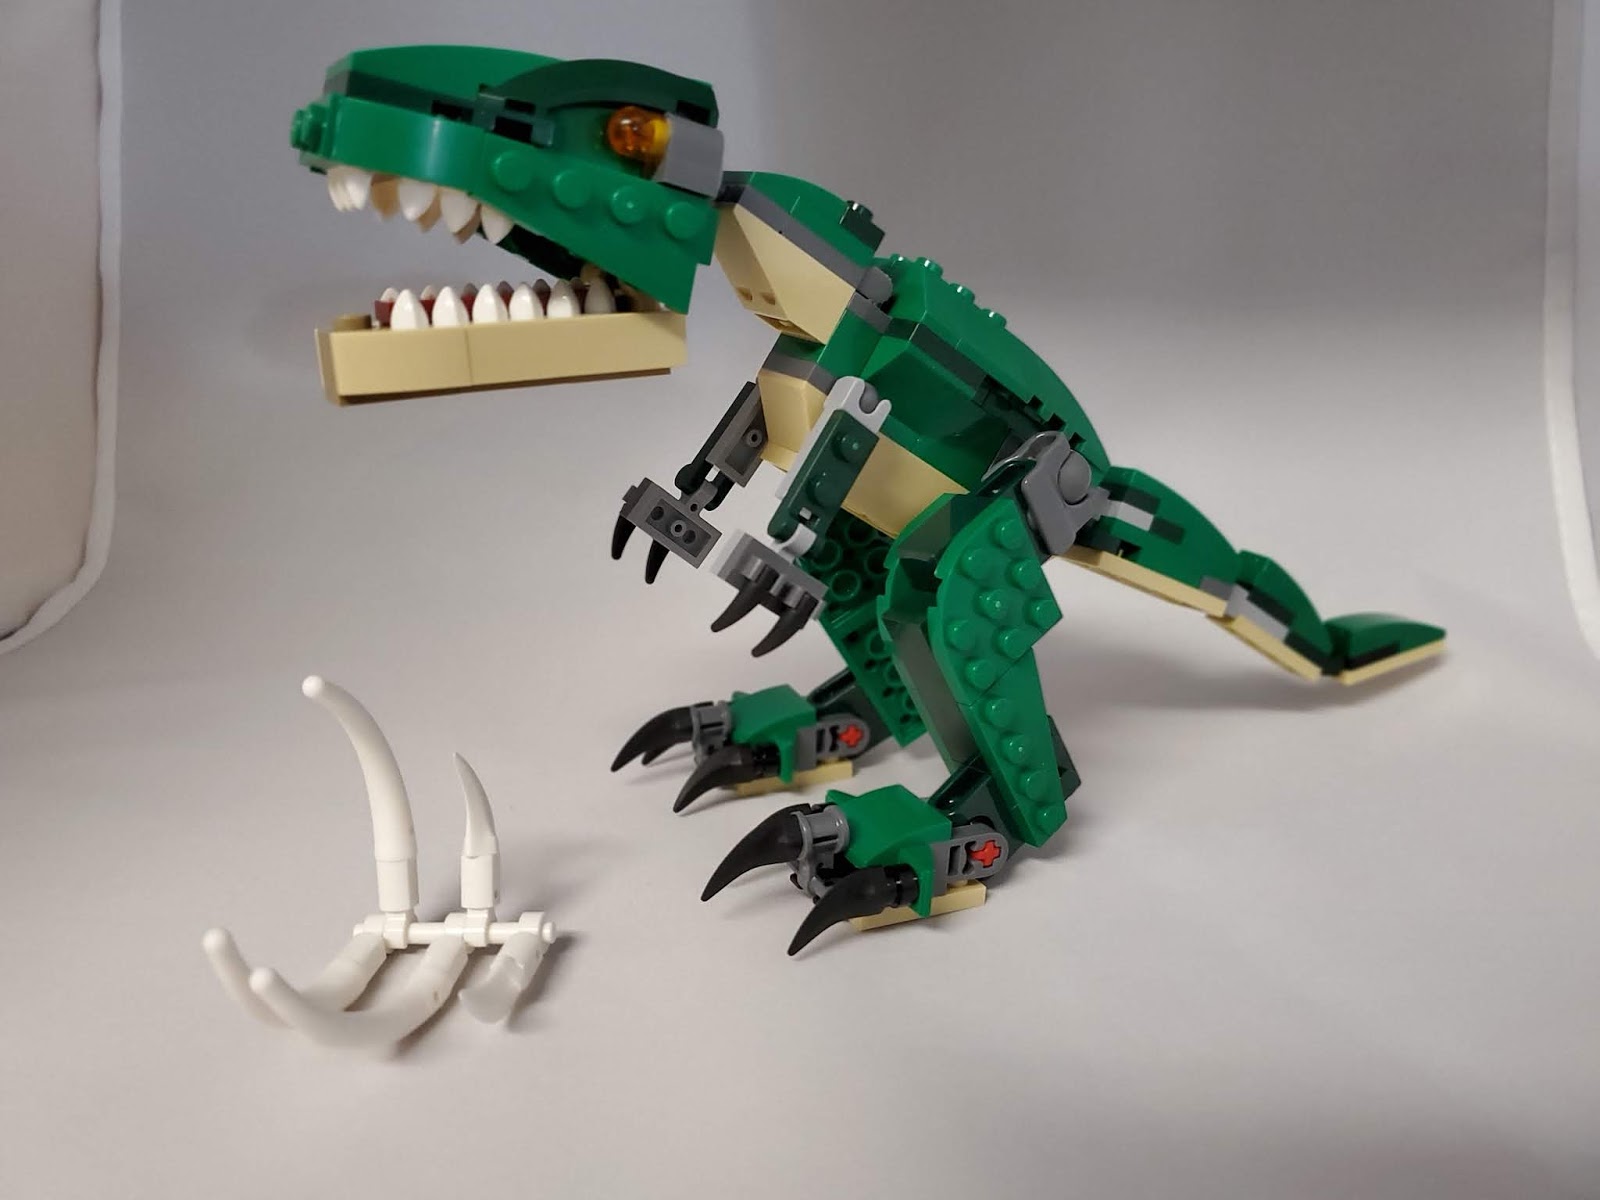 31058 Mighty Dinosaurs – Review